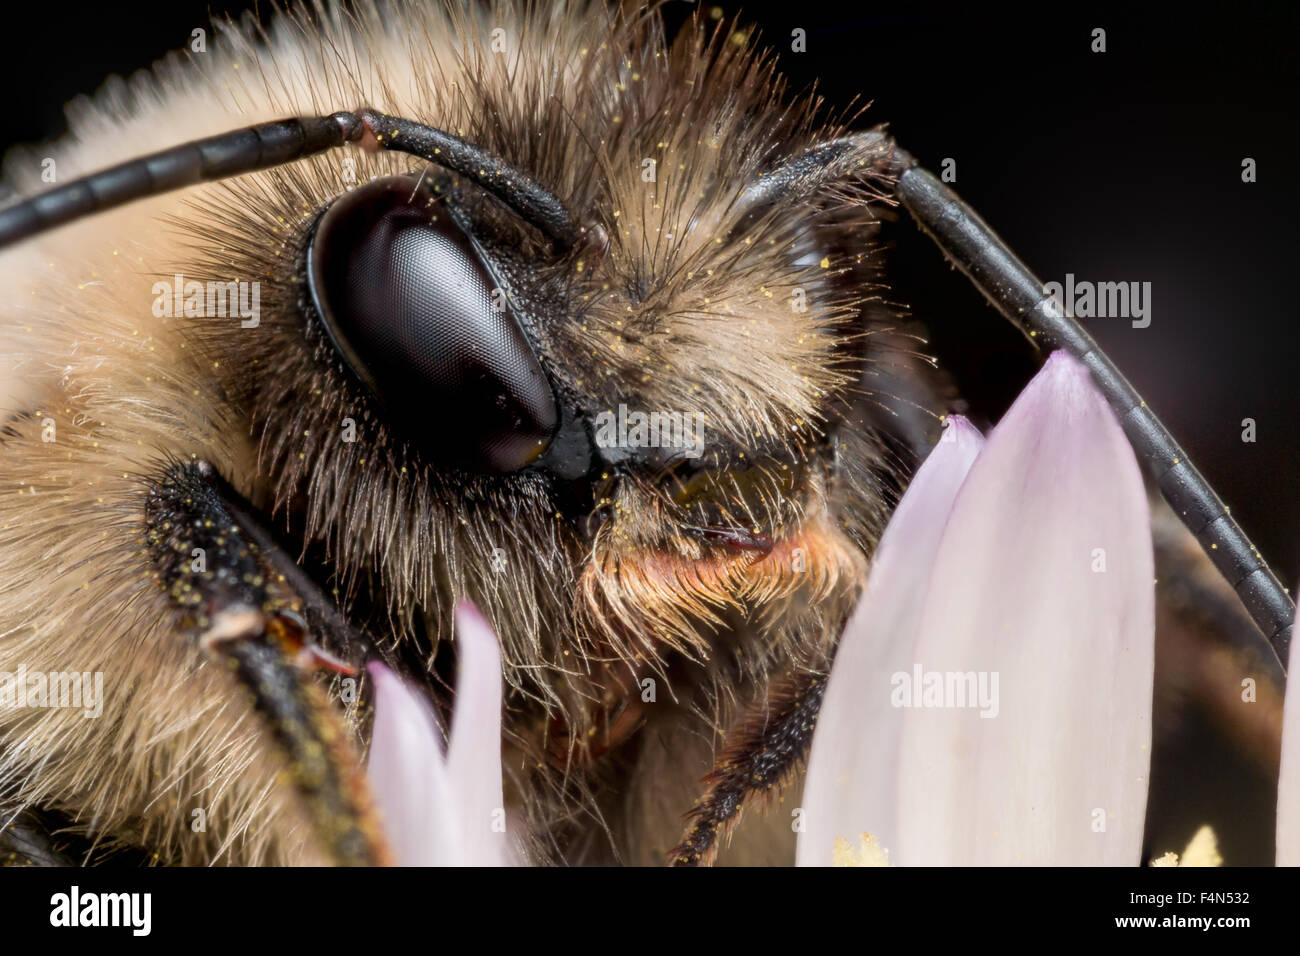 Close up portrait of bumble bee with hairy face on purple flower Stock Photo